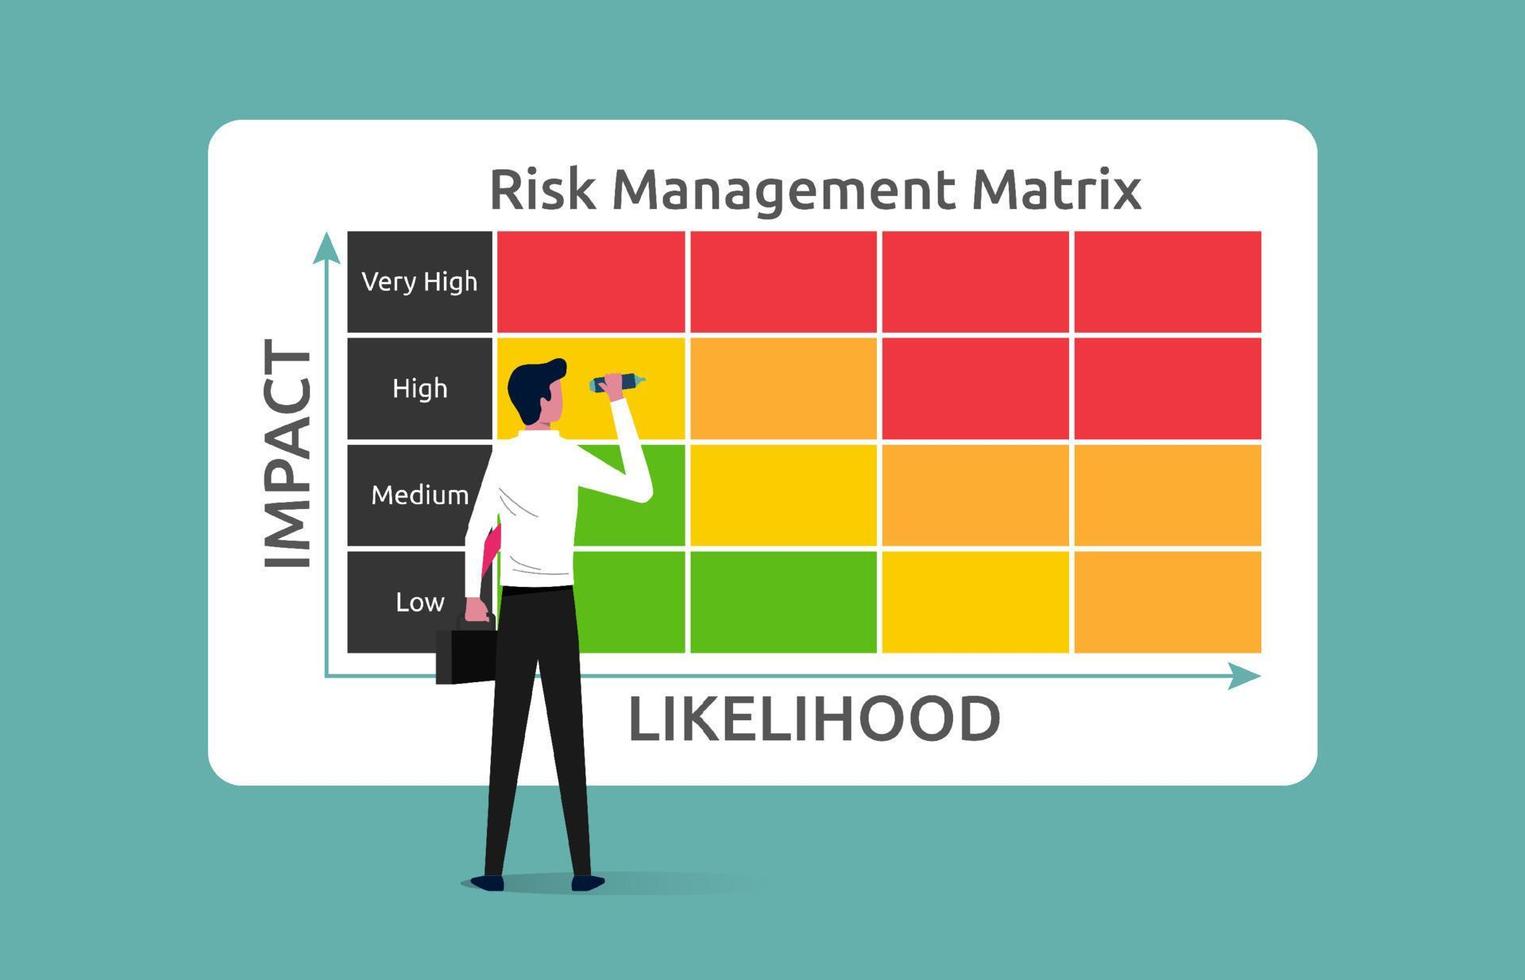 Risk management matrix with impact and likelihood, businessman analyzing the level of risk by considering the category of probability or likelihood against the category of consequence severity vector